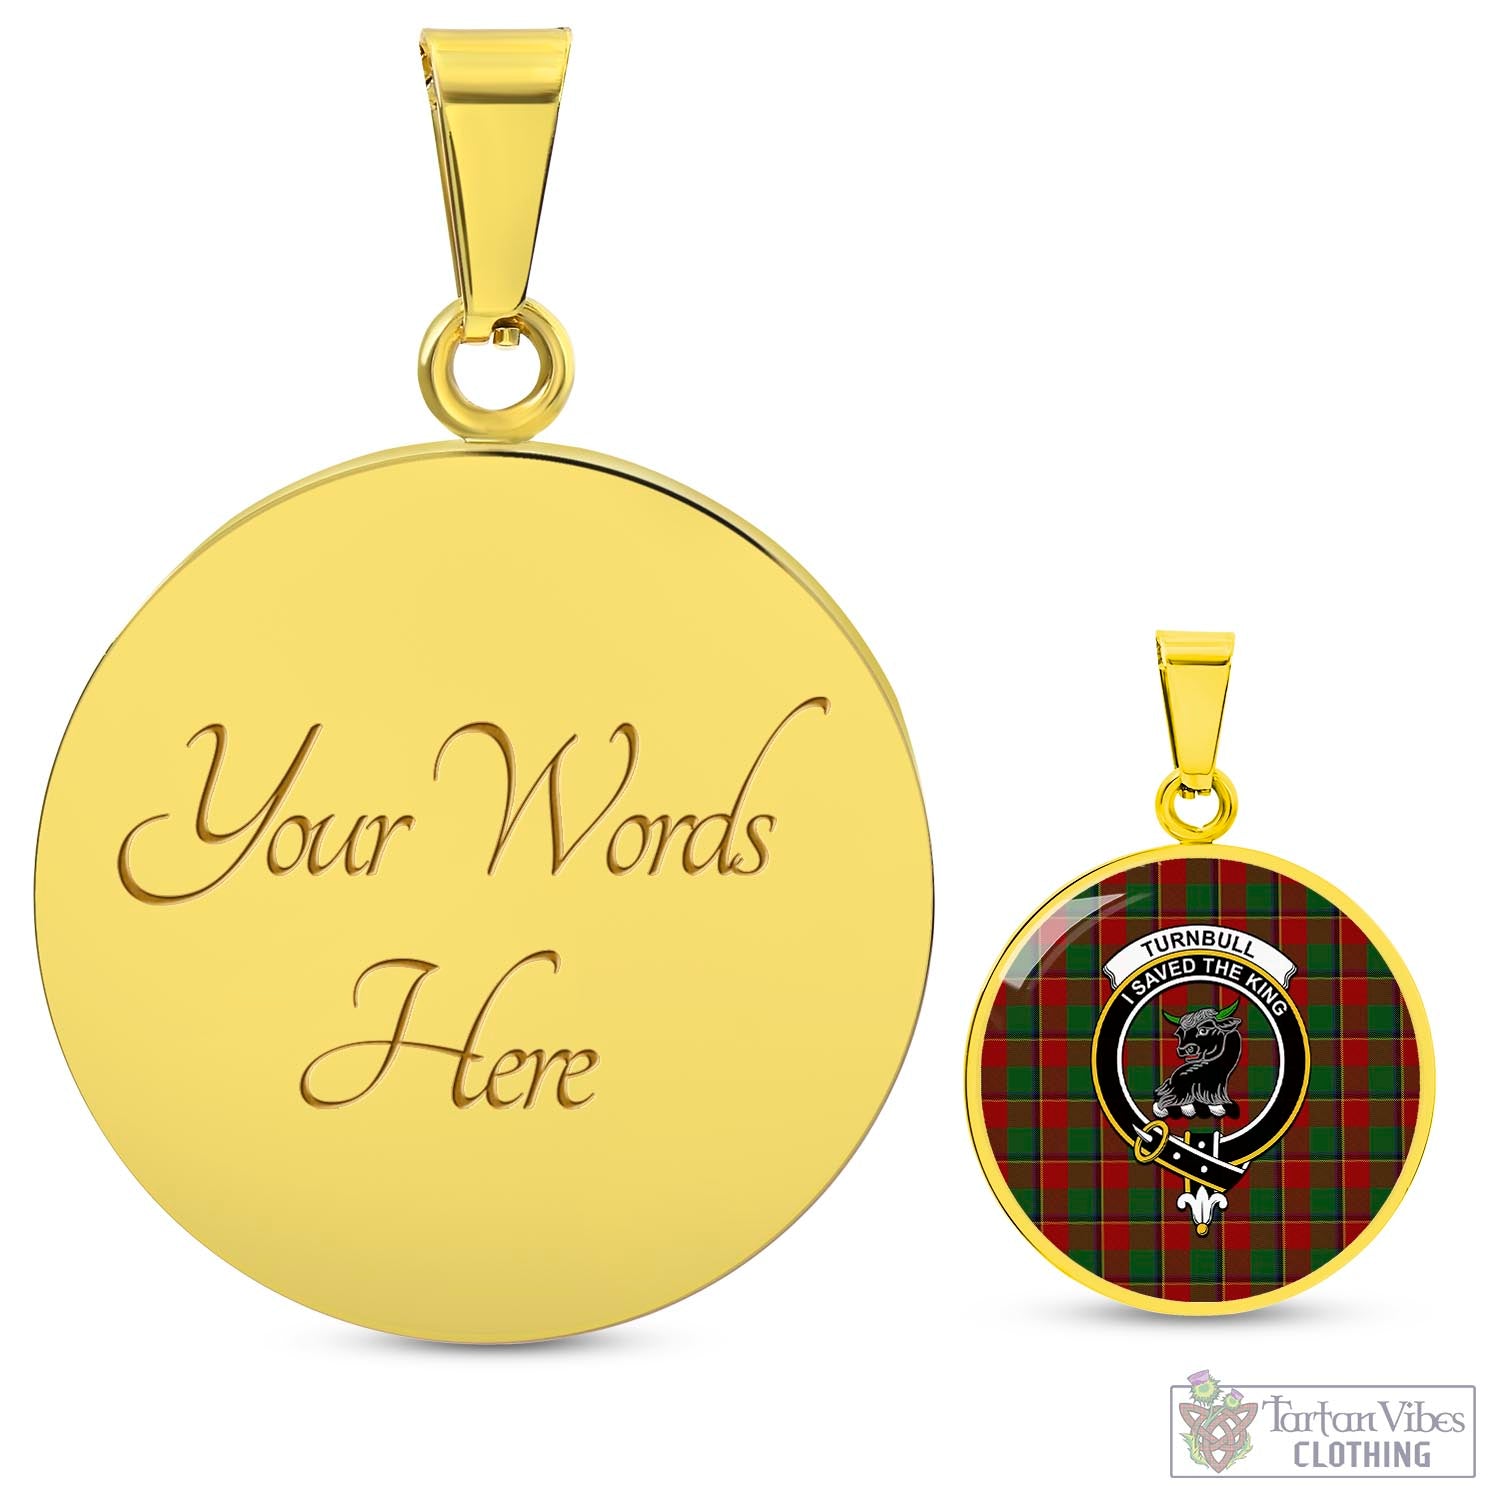 Tartan Vibes Clothing Turnbull Dress Tartan Circle Necklace with Family Crest